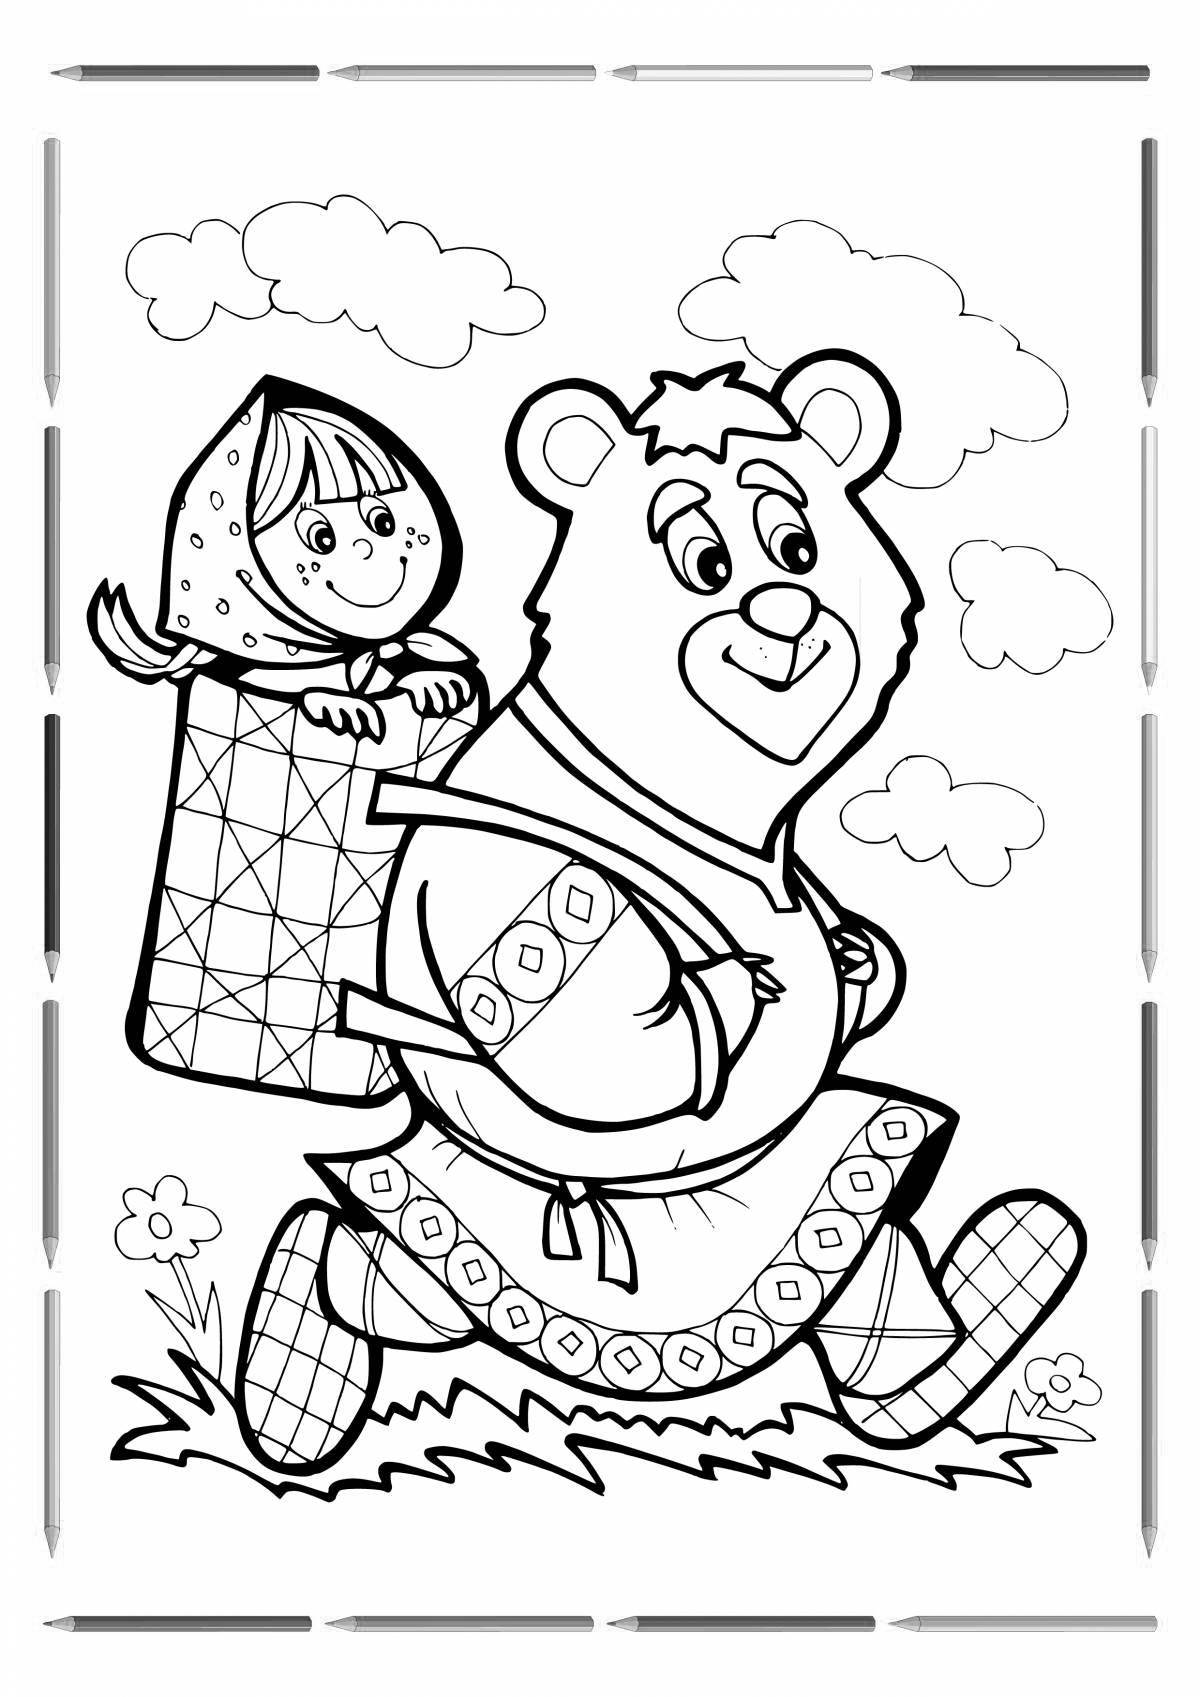 A fun coloring book for Russian fairy tales for kids